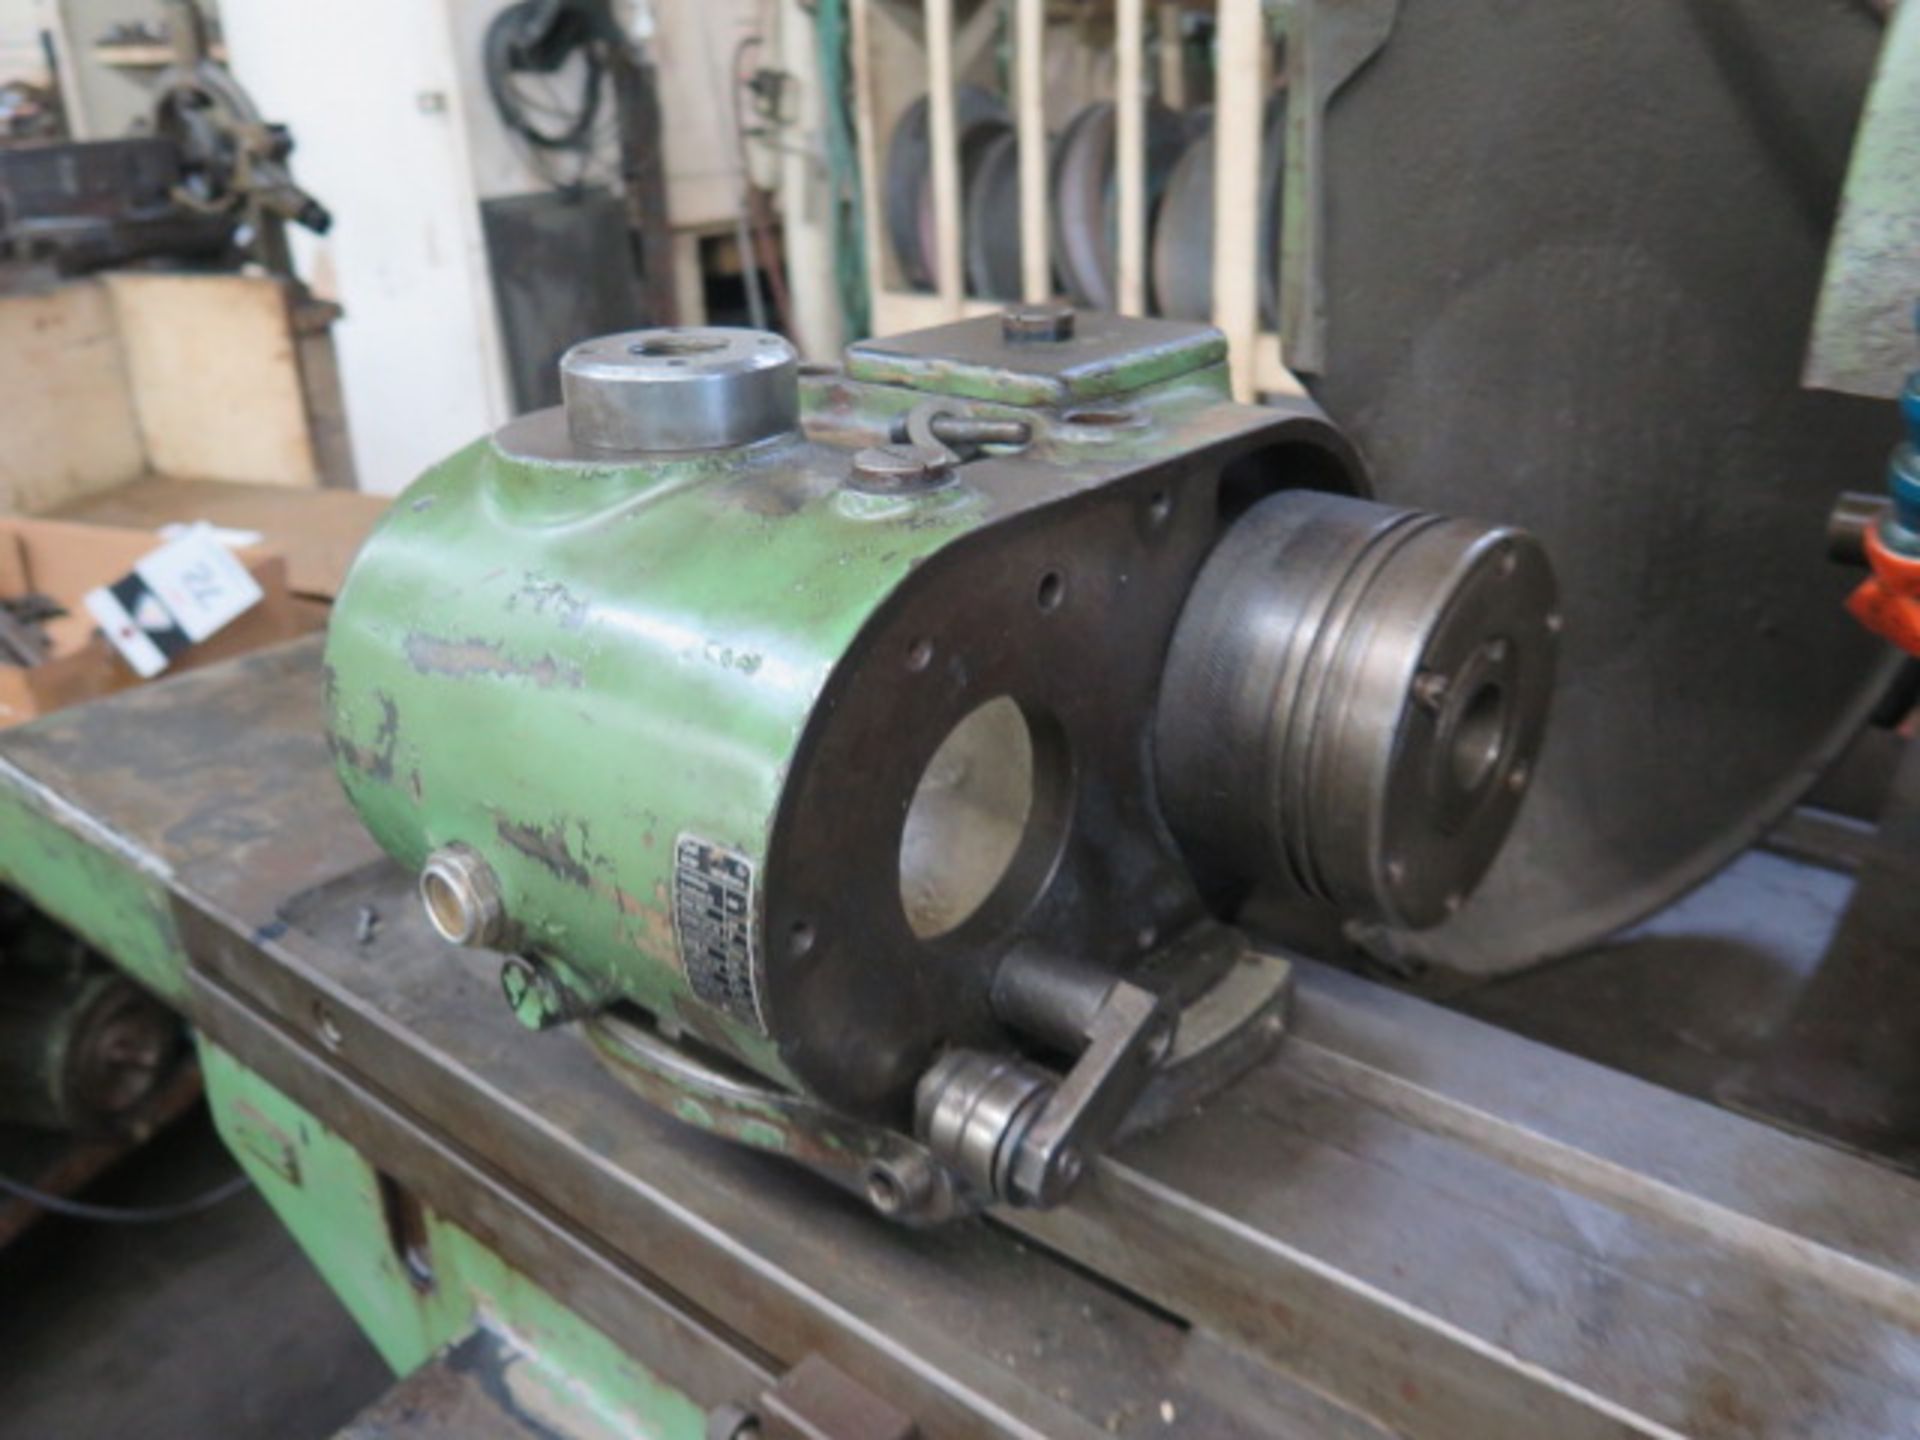 H. Tschudin HTG-400 Cylindrical Grinder s/n 681123 w/ Work Head (MOTOR REMOVED), SOLD AS IS - Image 4 of 12